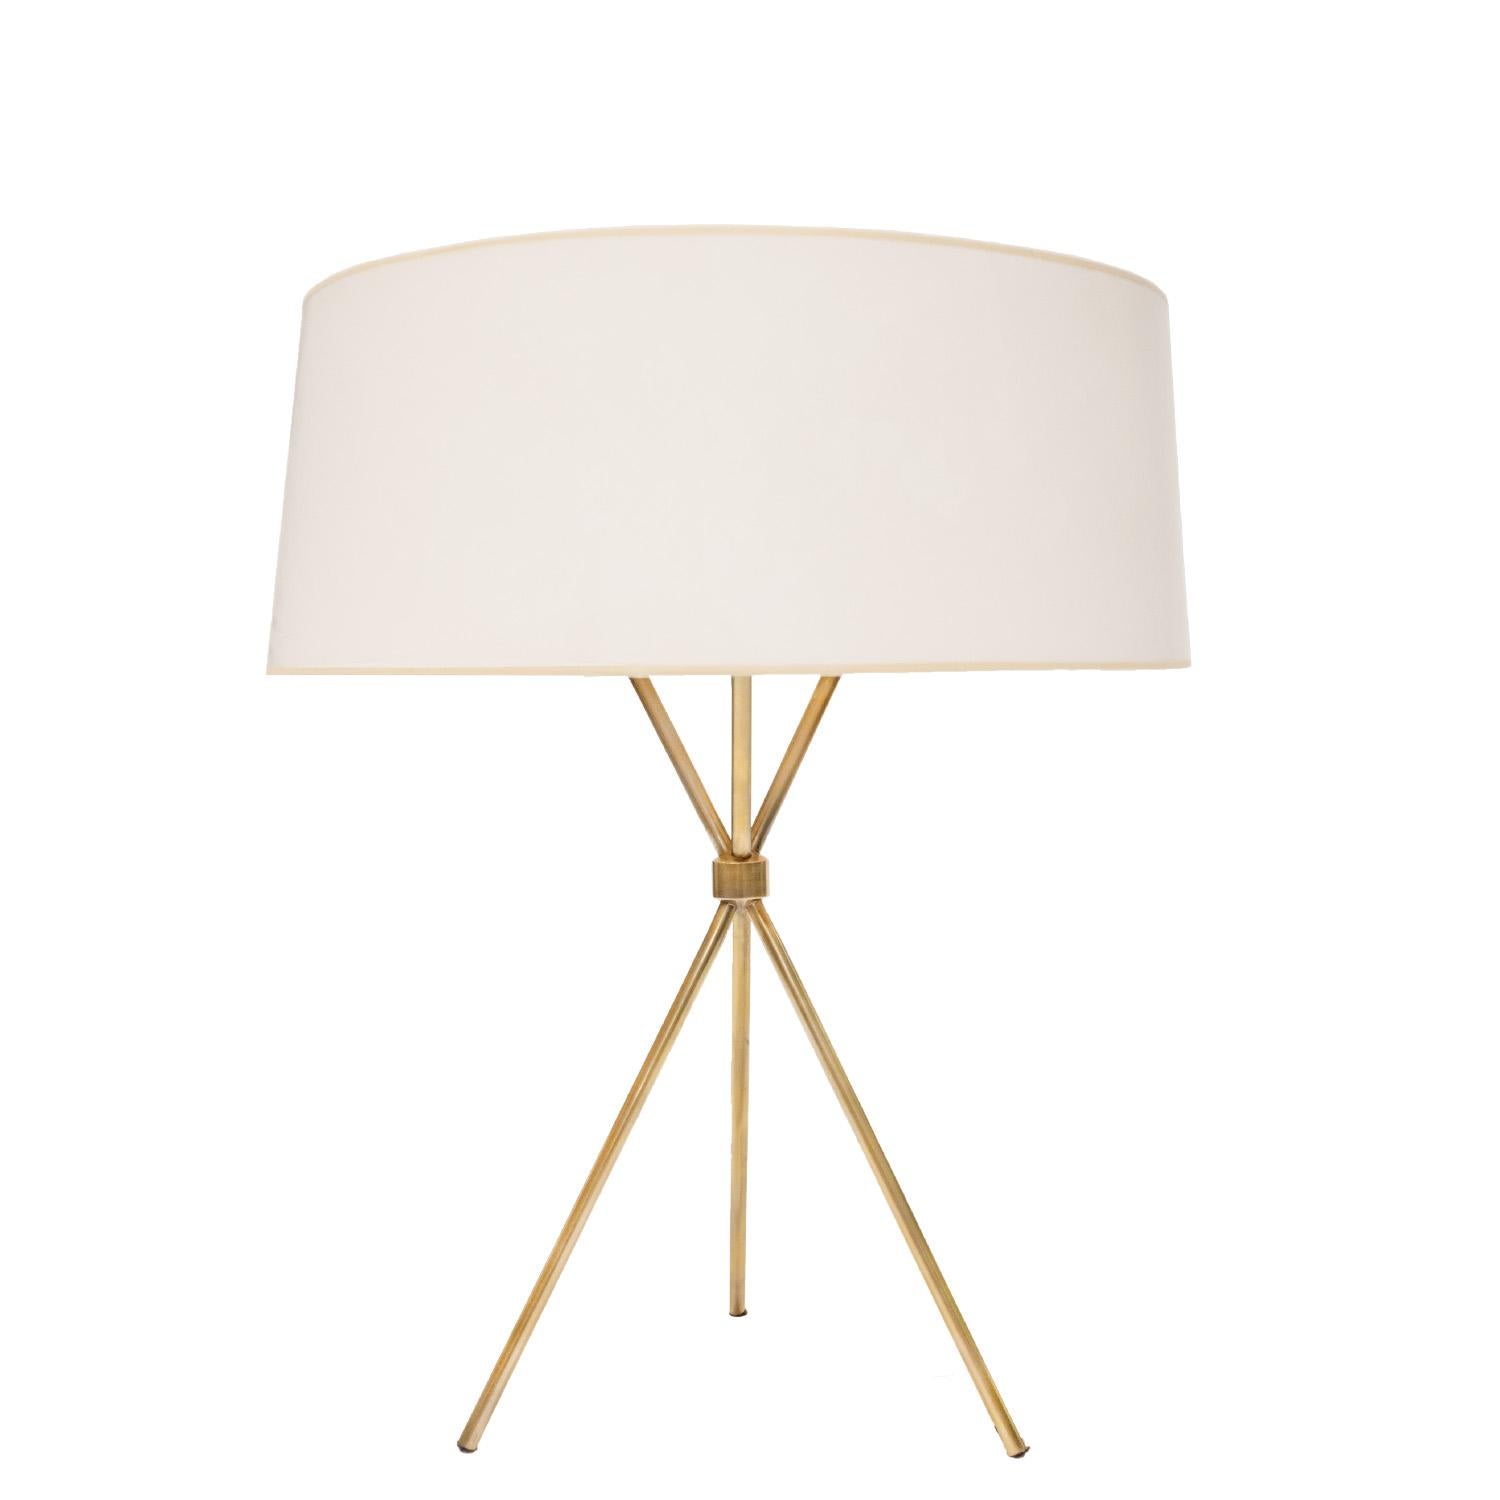 Tripod table lamp model no. 170 in brass with 3 bulbs and shade by T.H. Robsjohn-Gibbings for Hansen Lighting, American 1960's.  This lamp has been rewired with a silk cord.  A timeless mid-century design by one of it’s greatest